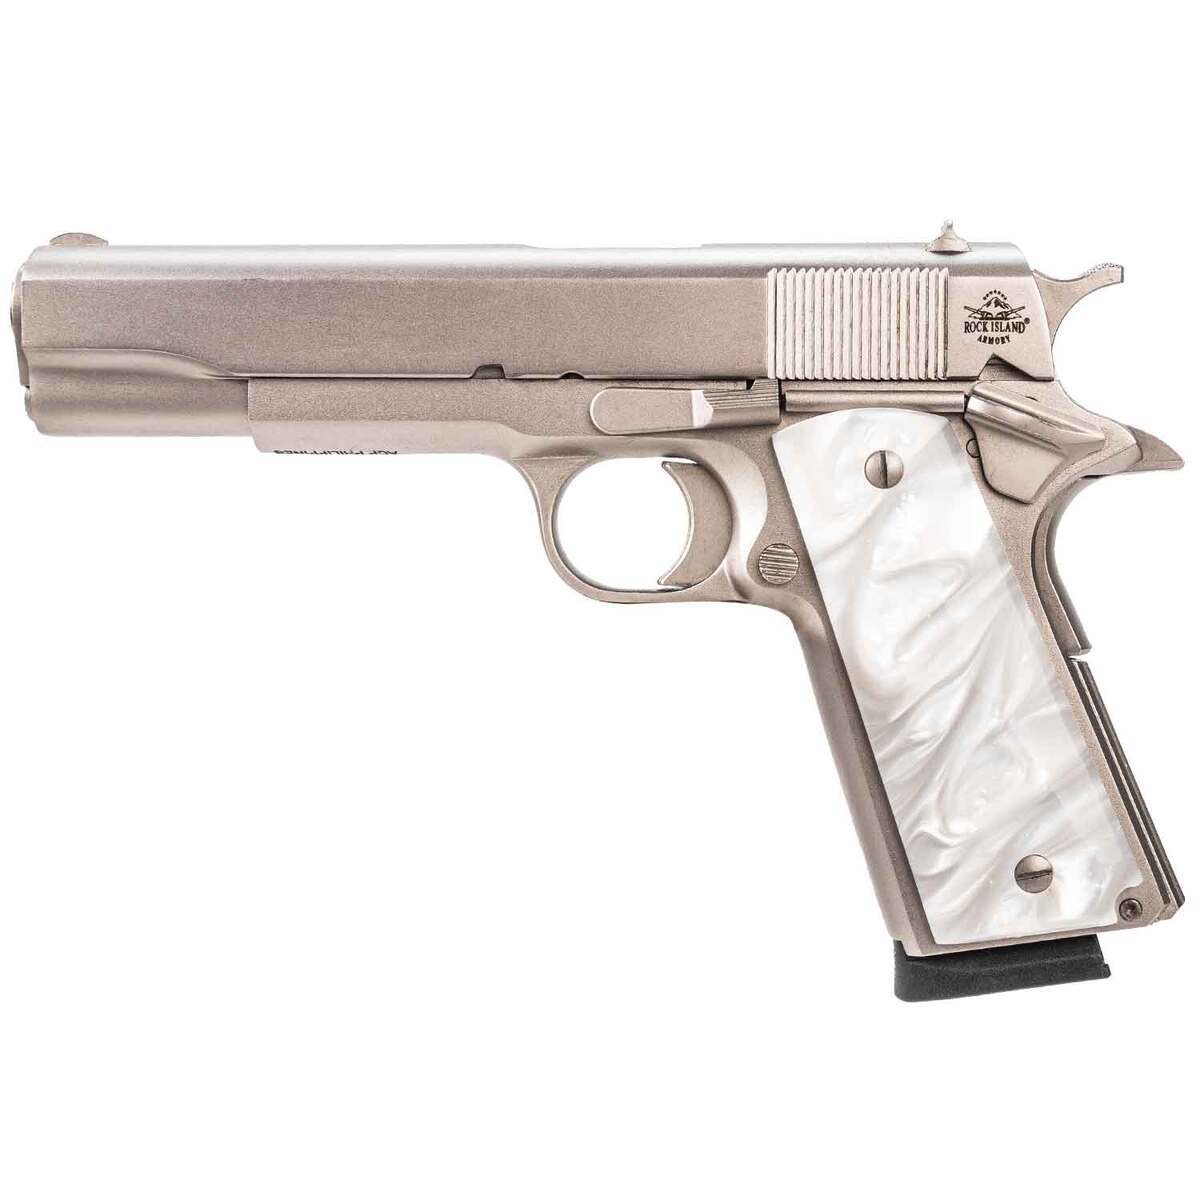 Rock Island Armory M1911 A1 Gi 45 Auto Acp 5in Matte Nickle Pistol 81 Rounds Sportsmans 2968